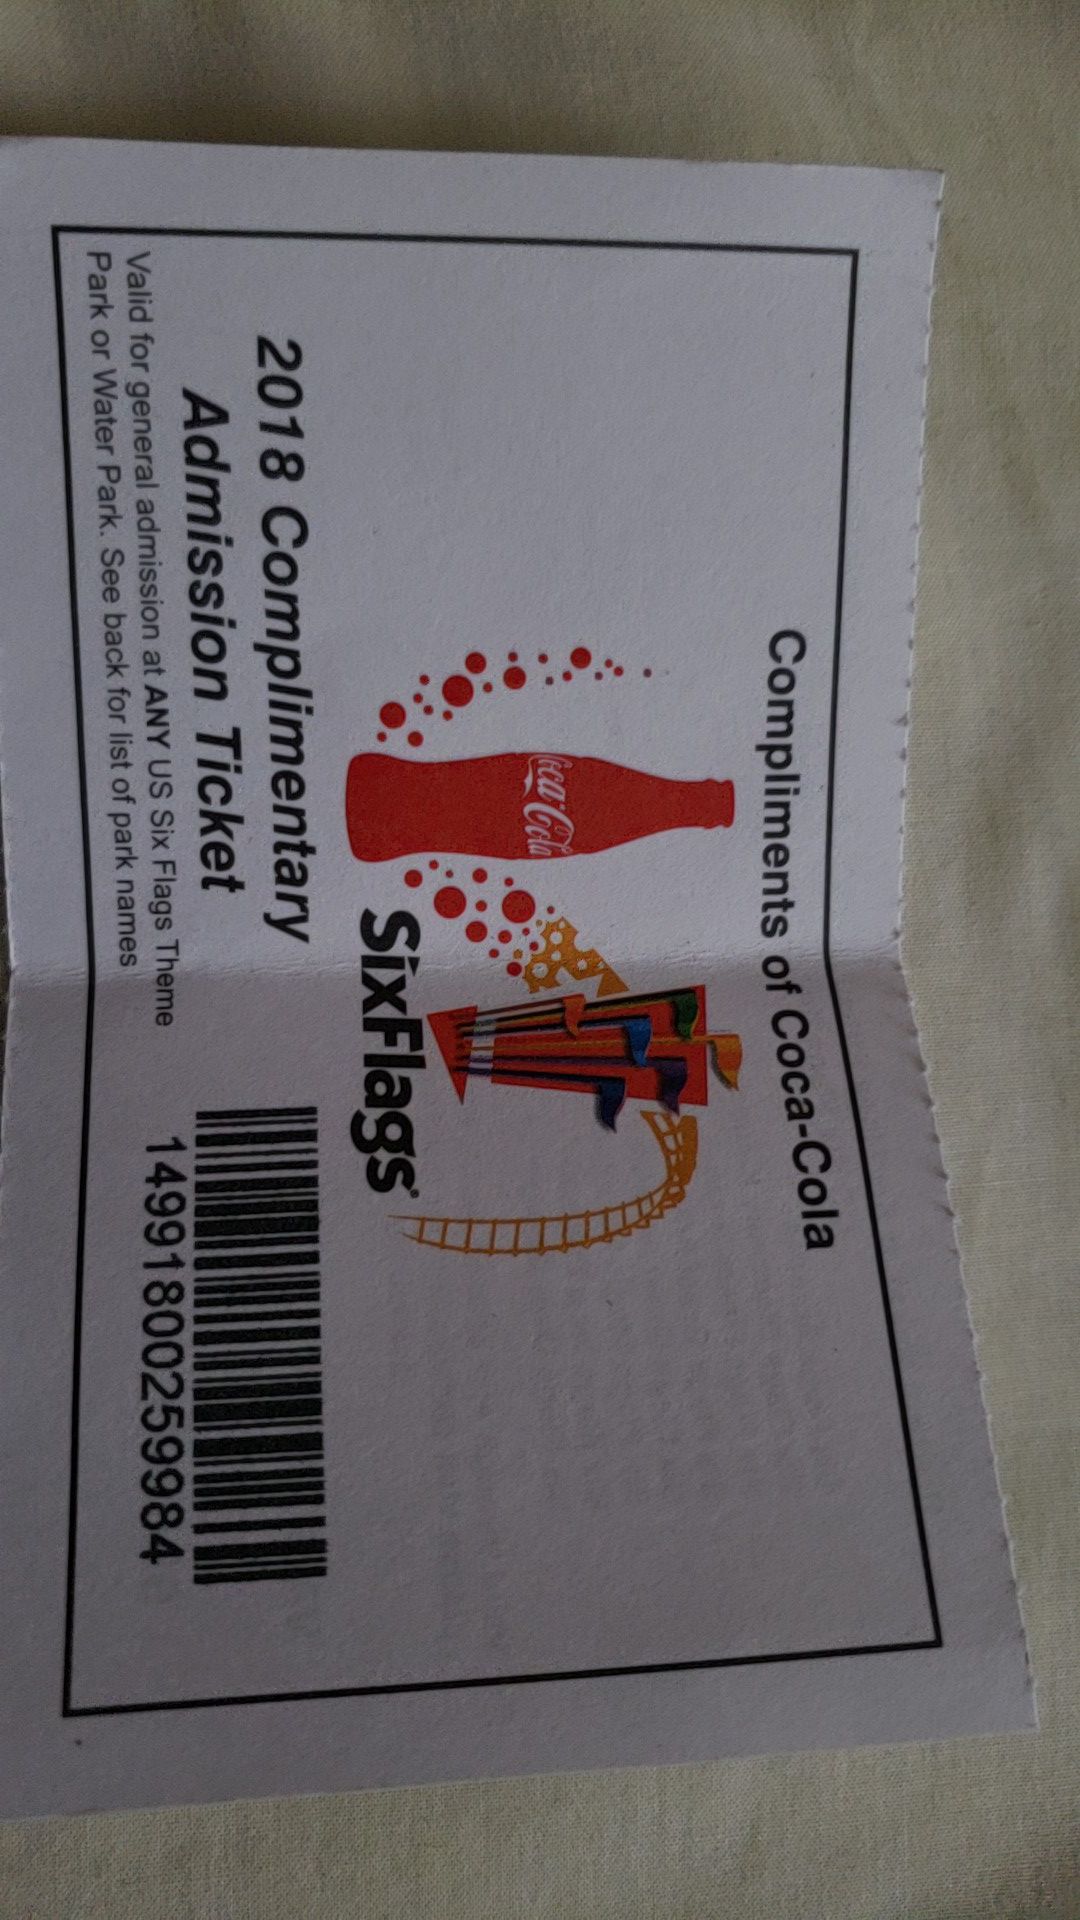 Six flags ticket